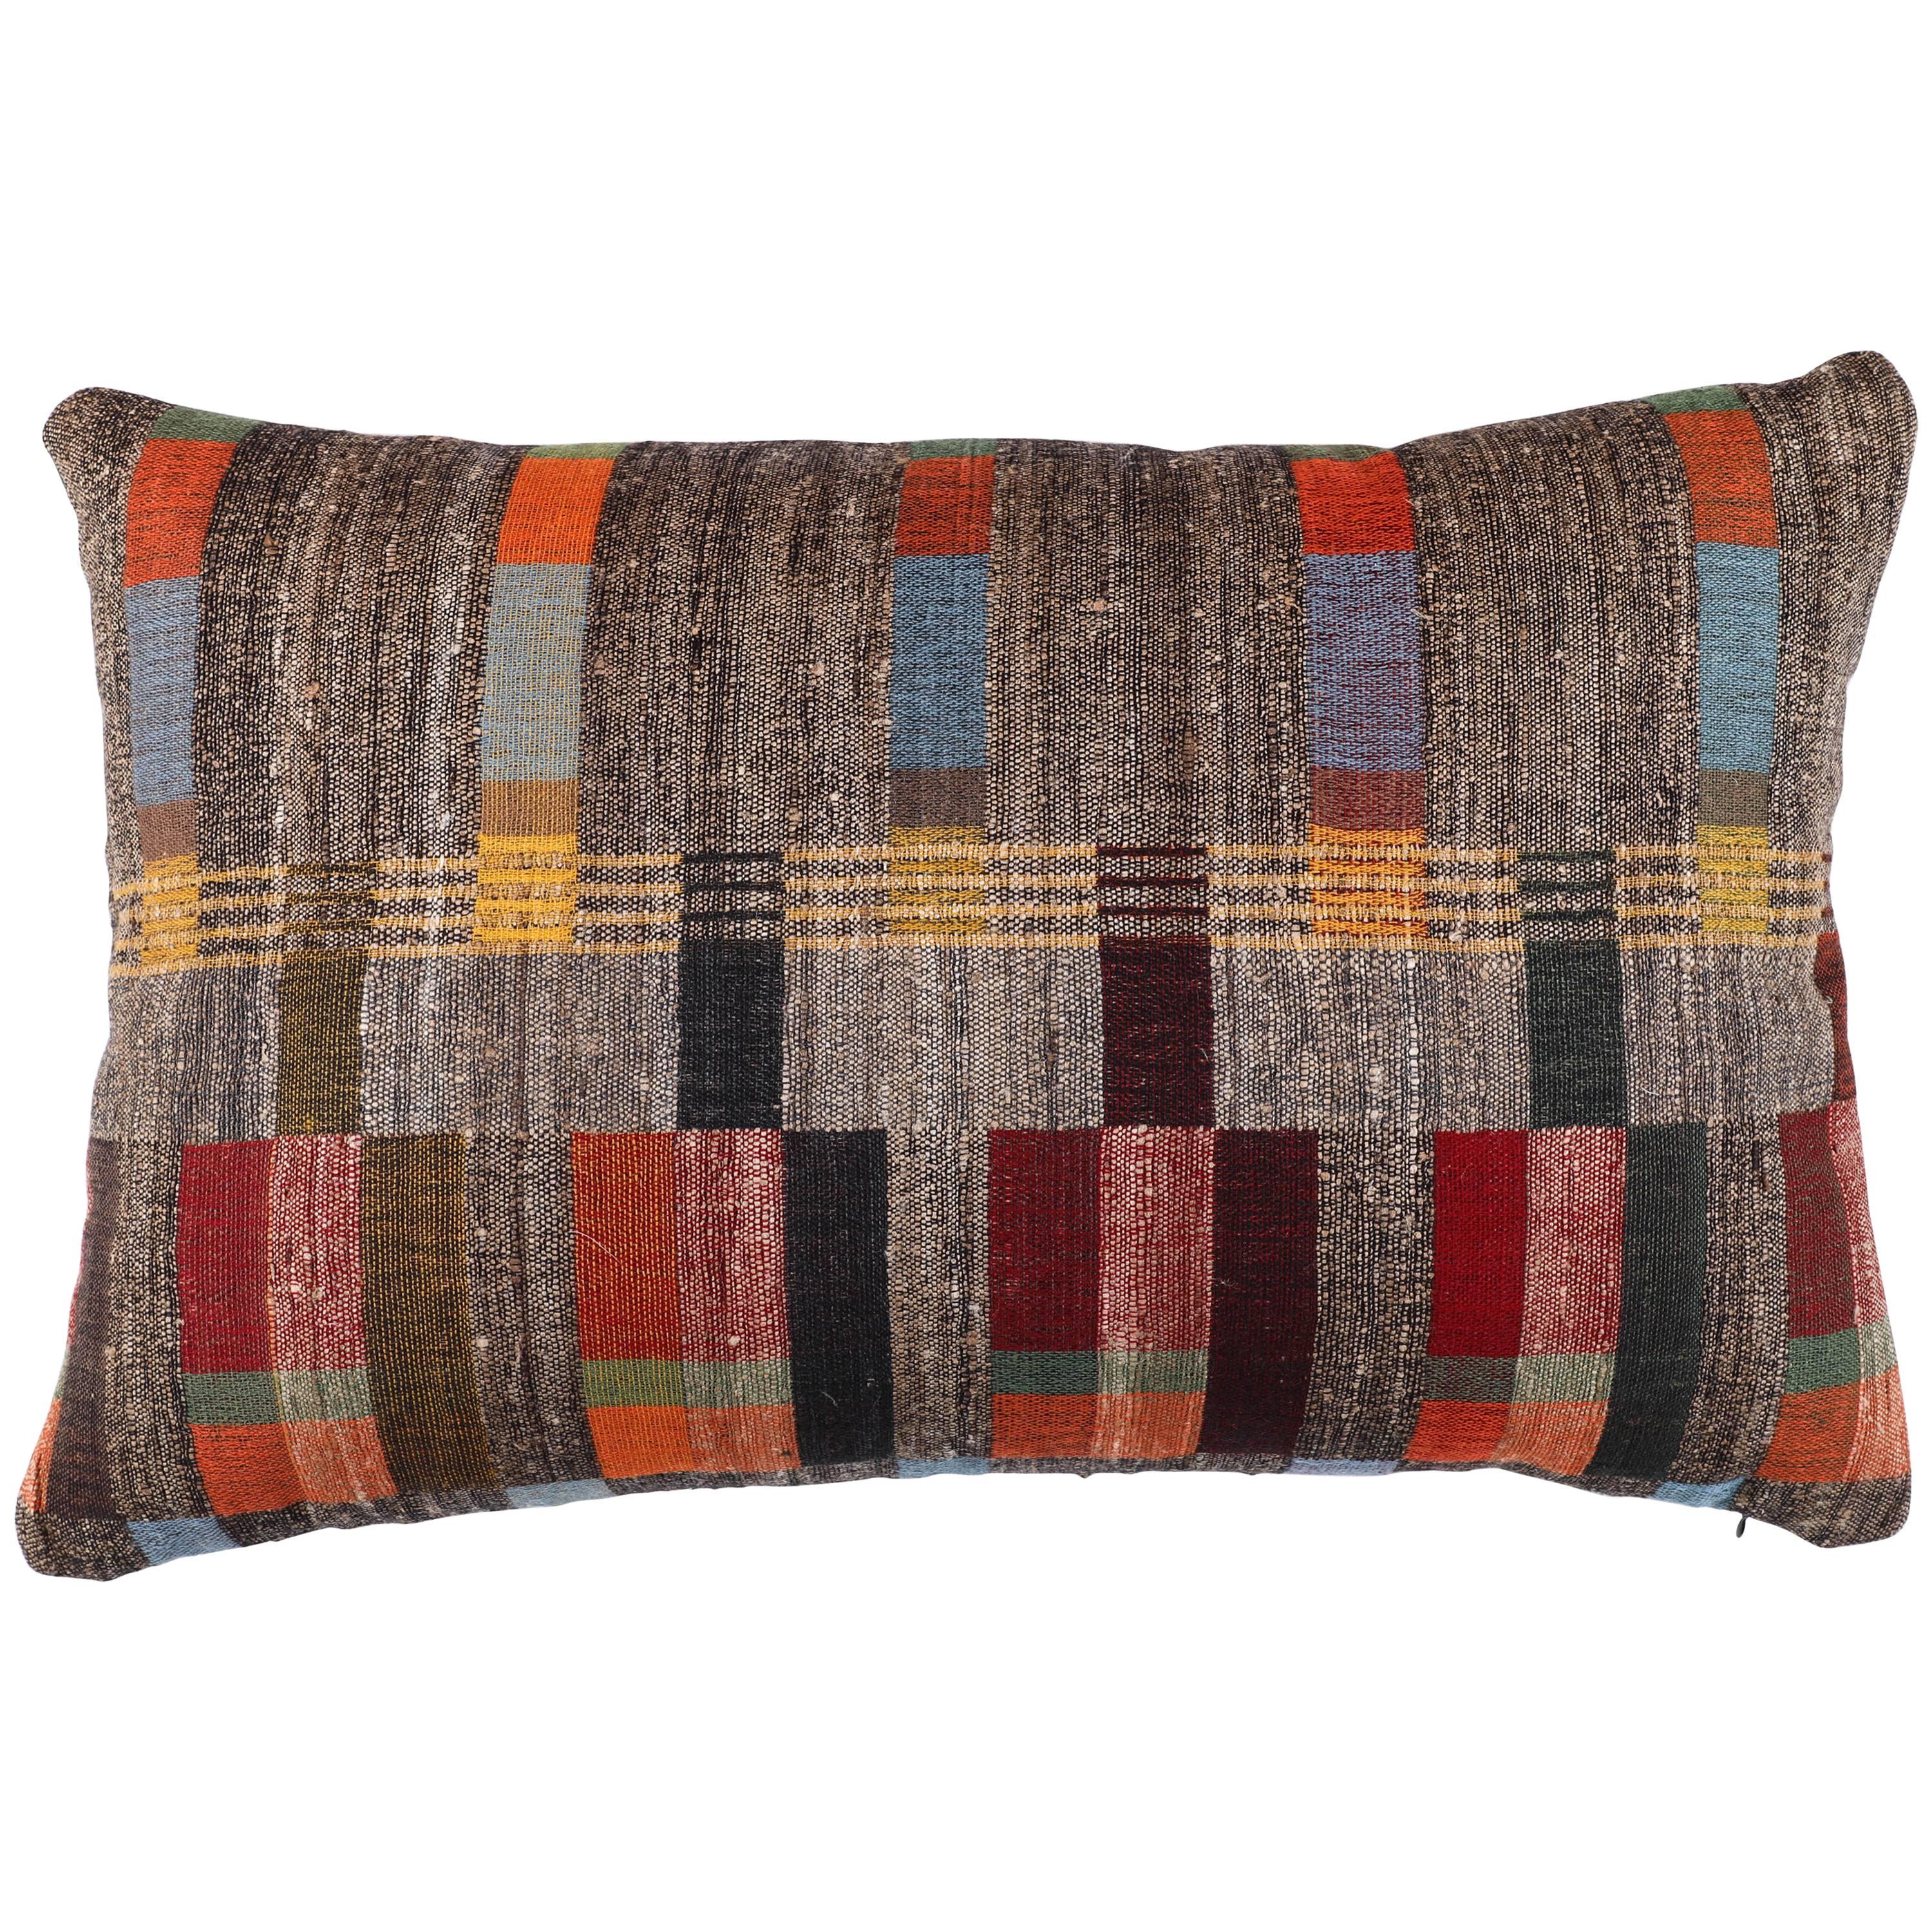 Indian Handwoven Pillow For Sale